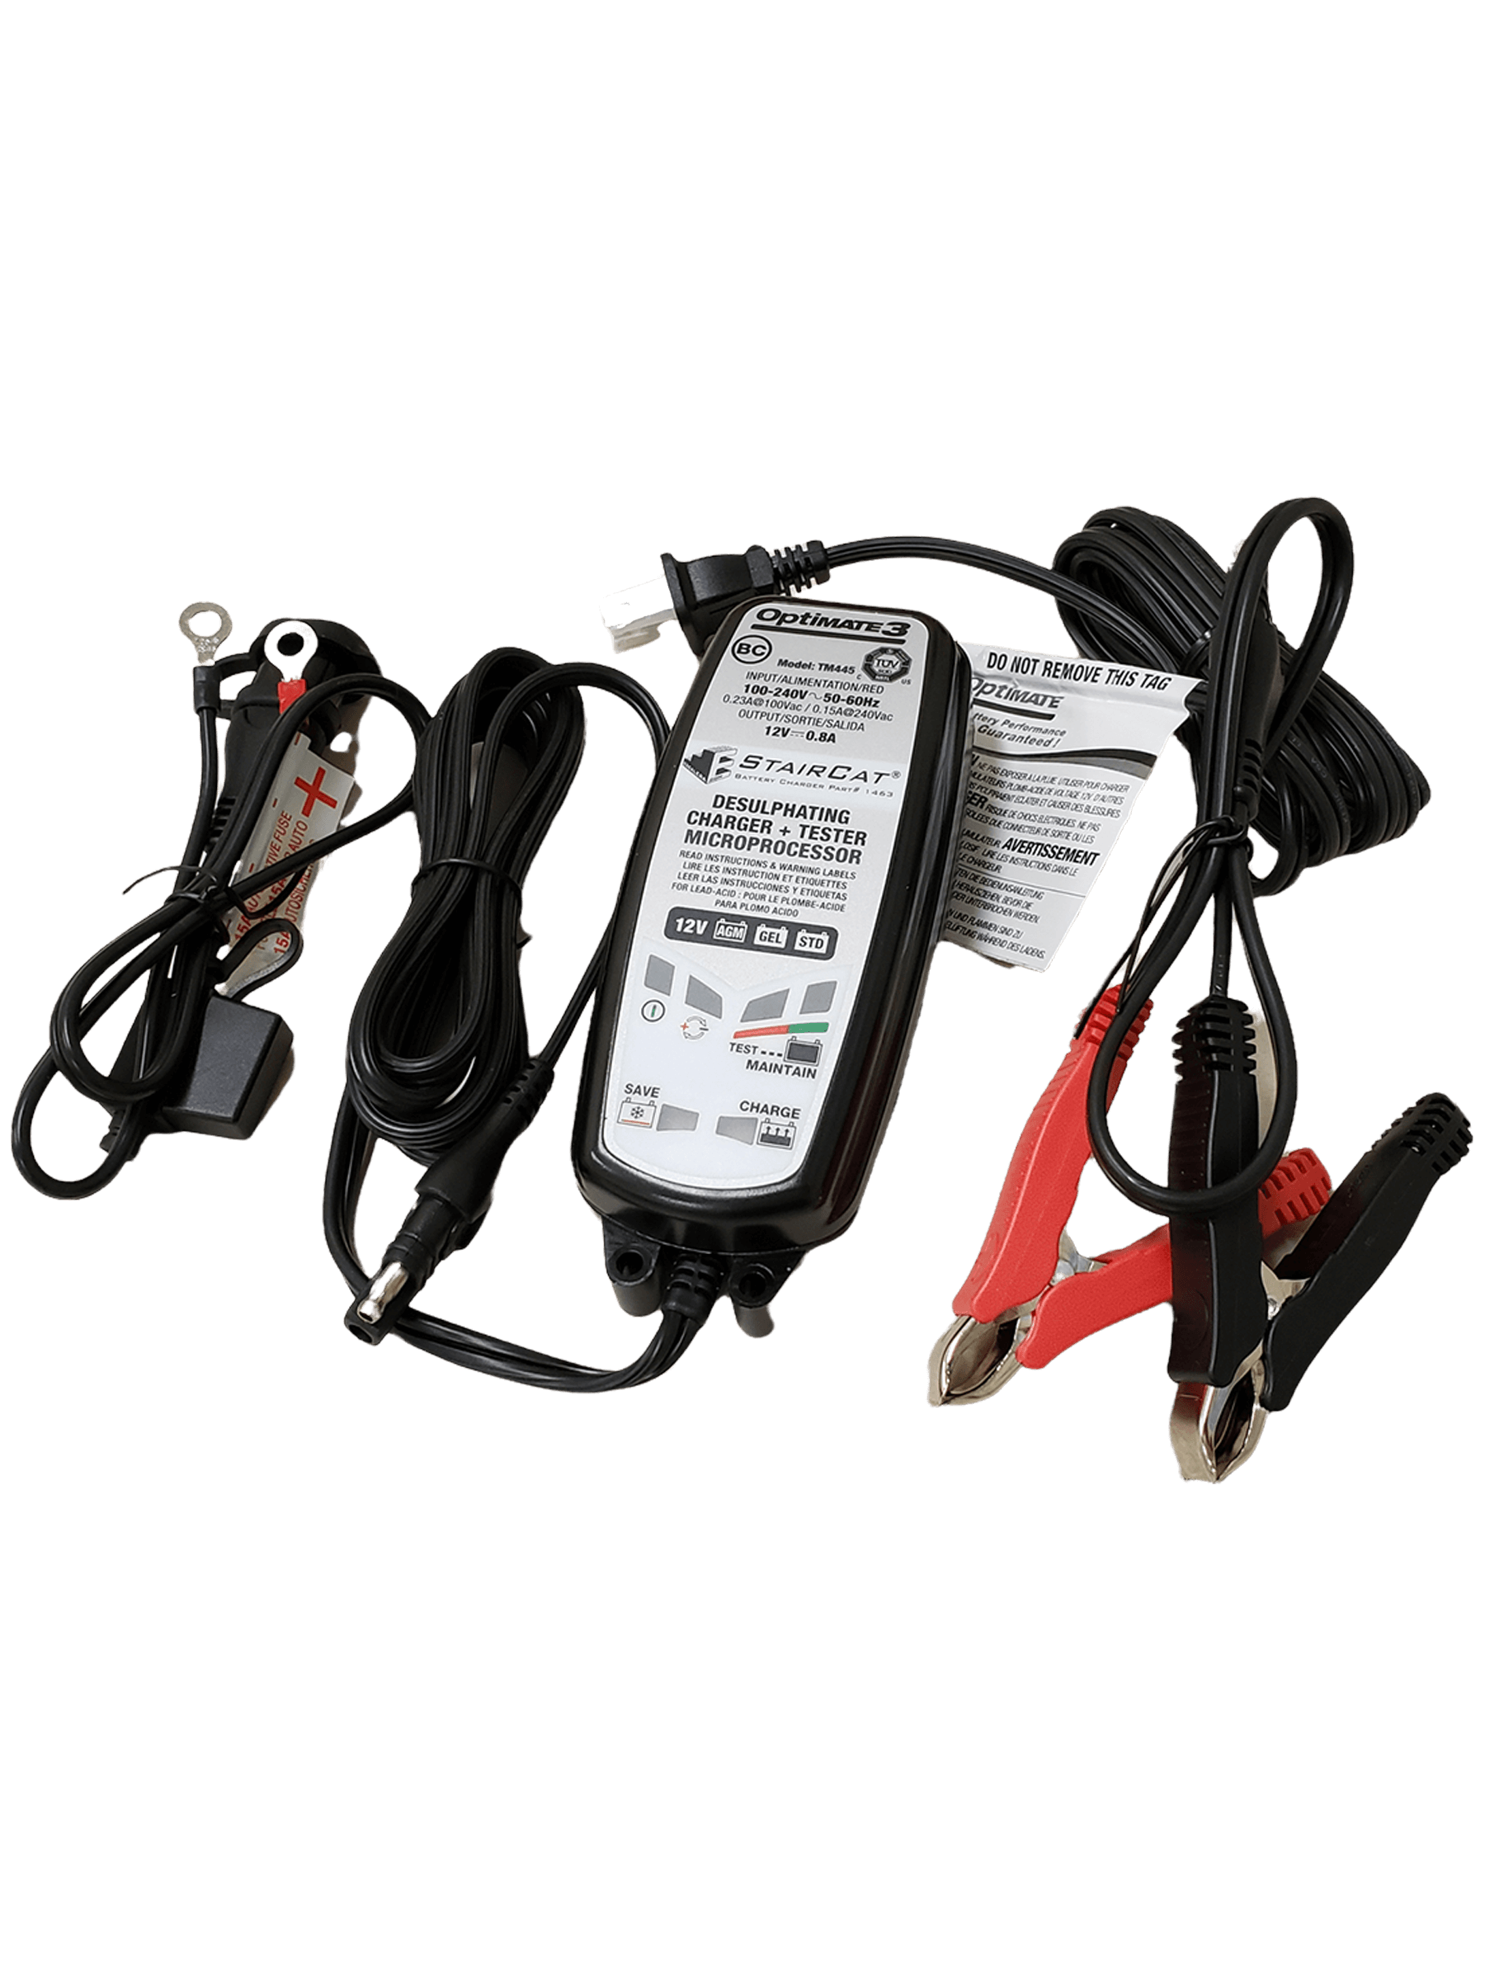 Picture of Battery Charger for Escalera Hand Truck